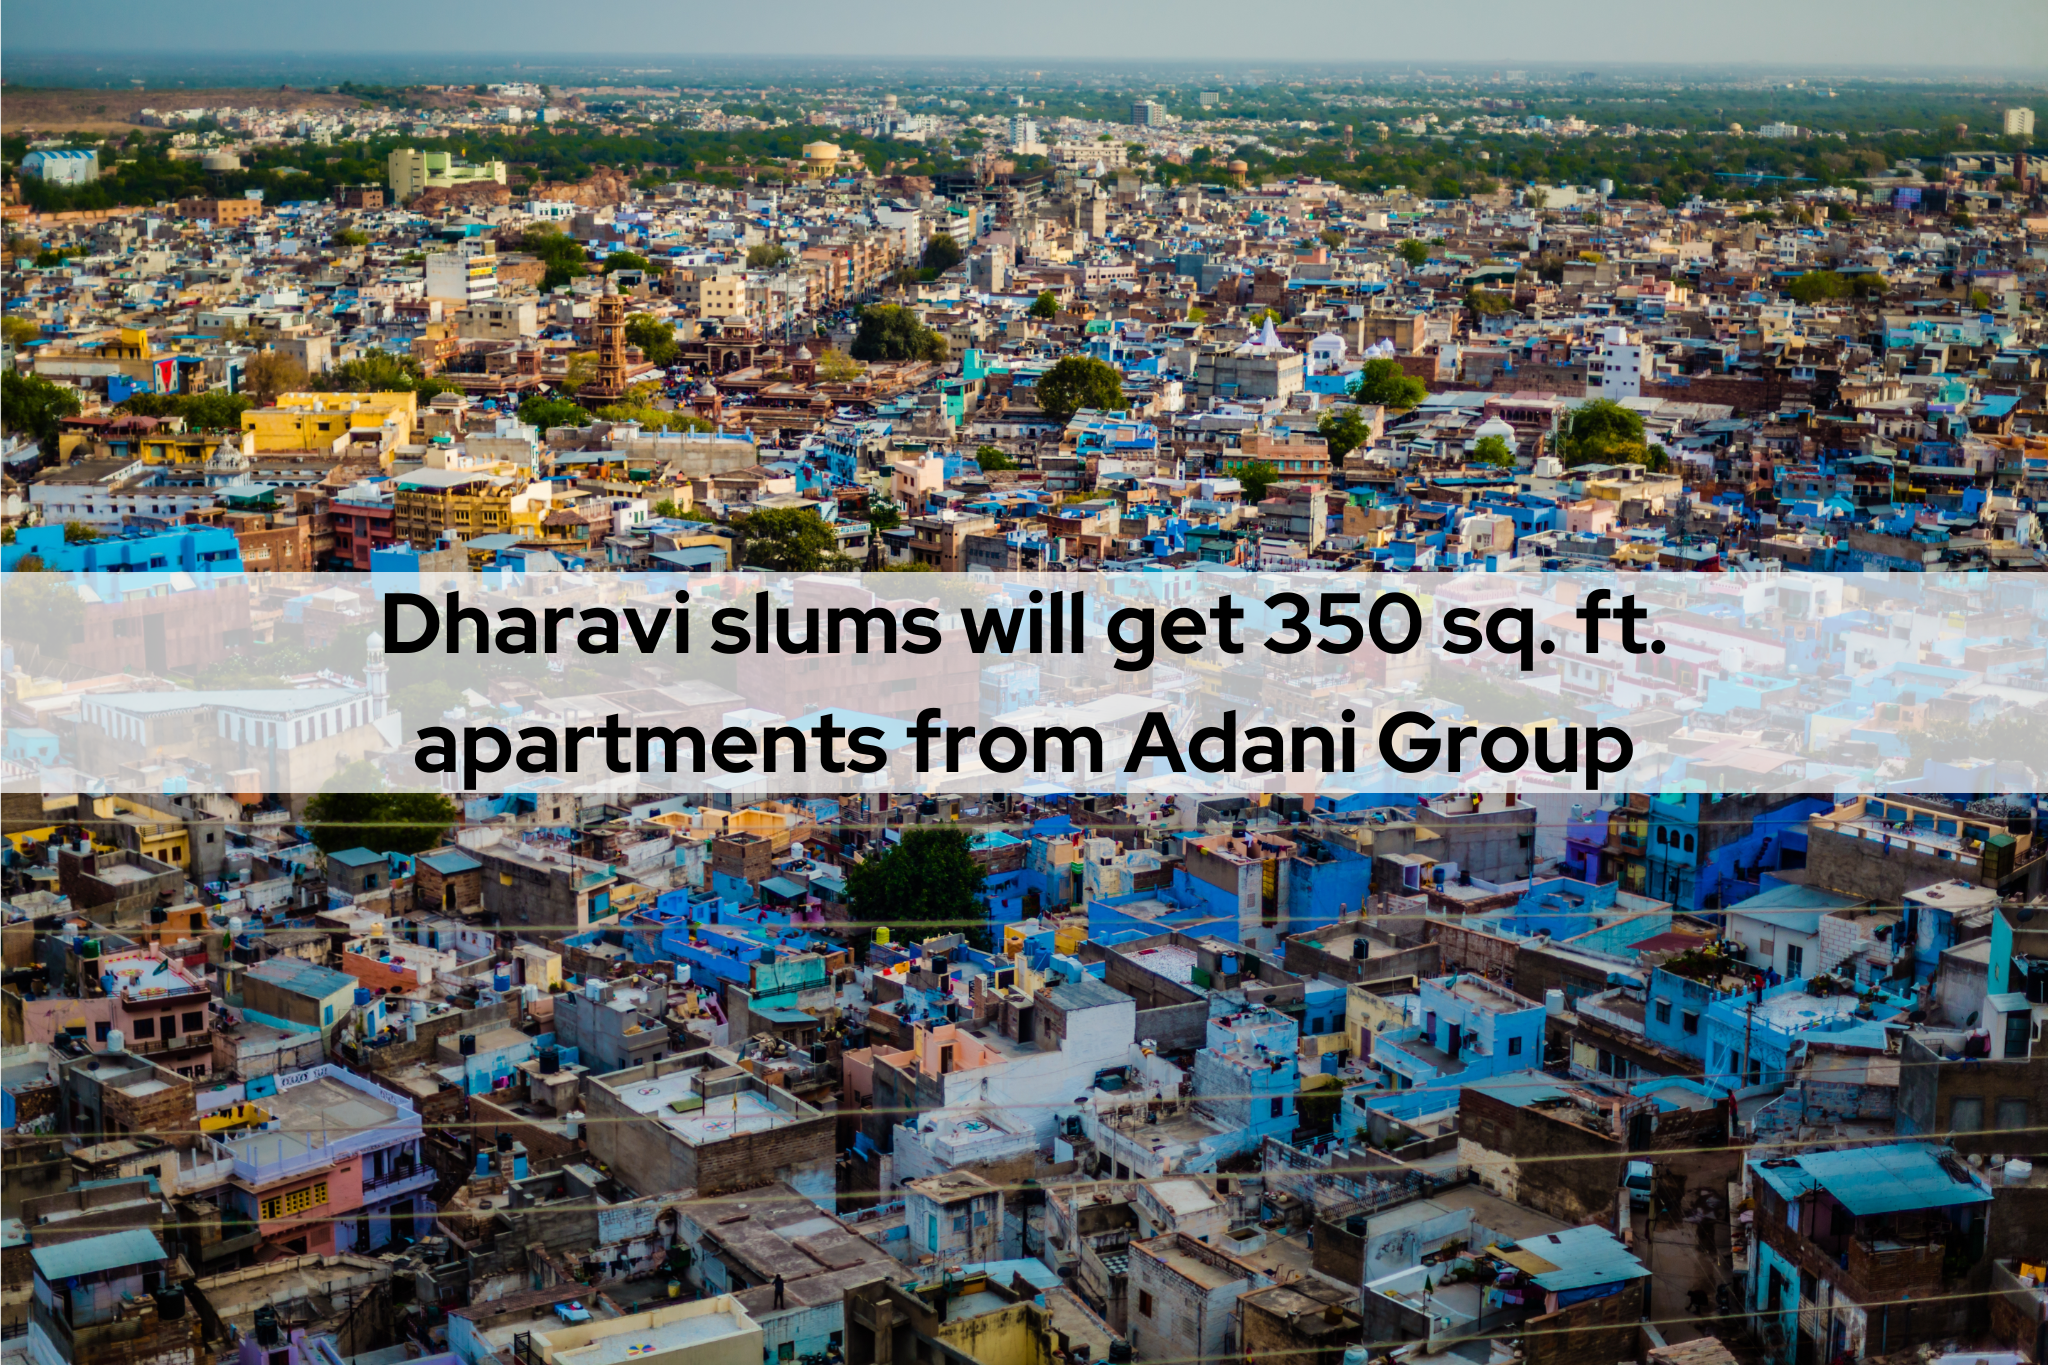 Dharavi slums will get 350 sq. ft. apartments from Adani Group